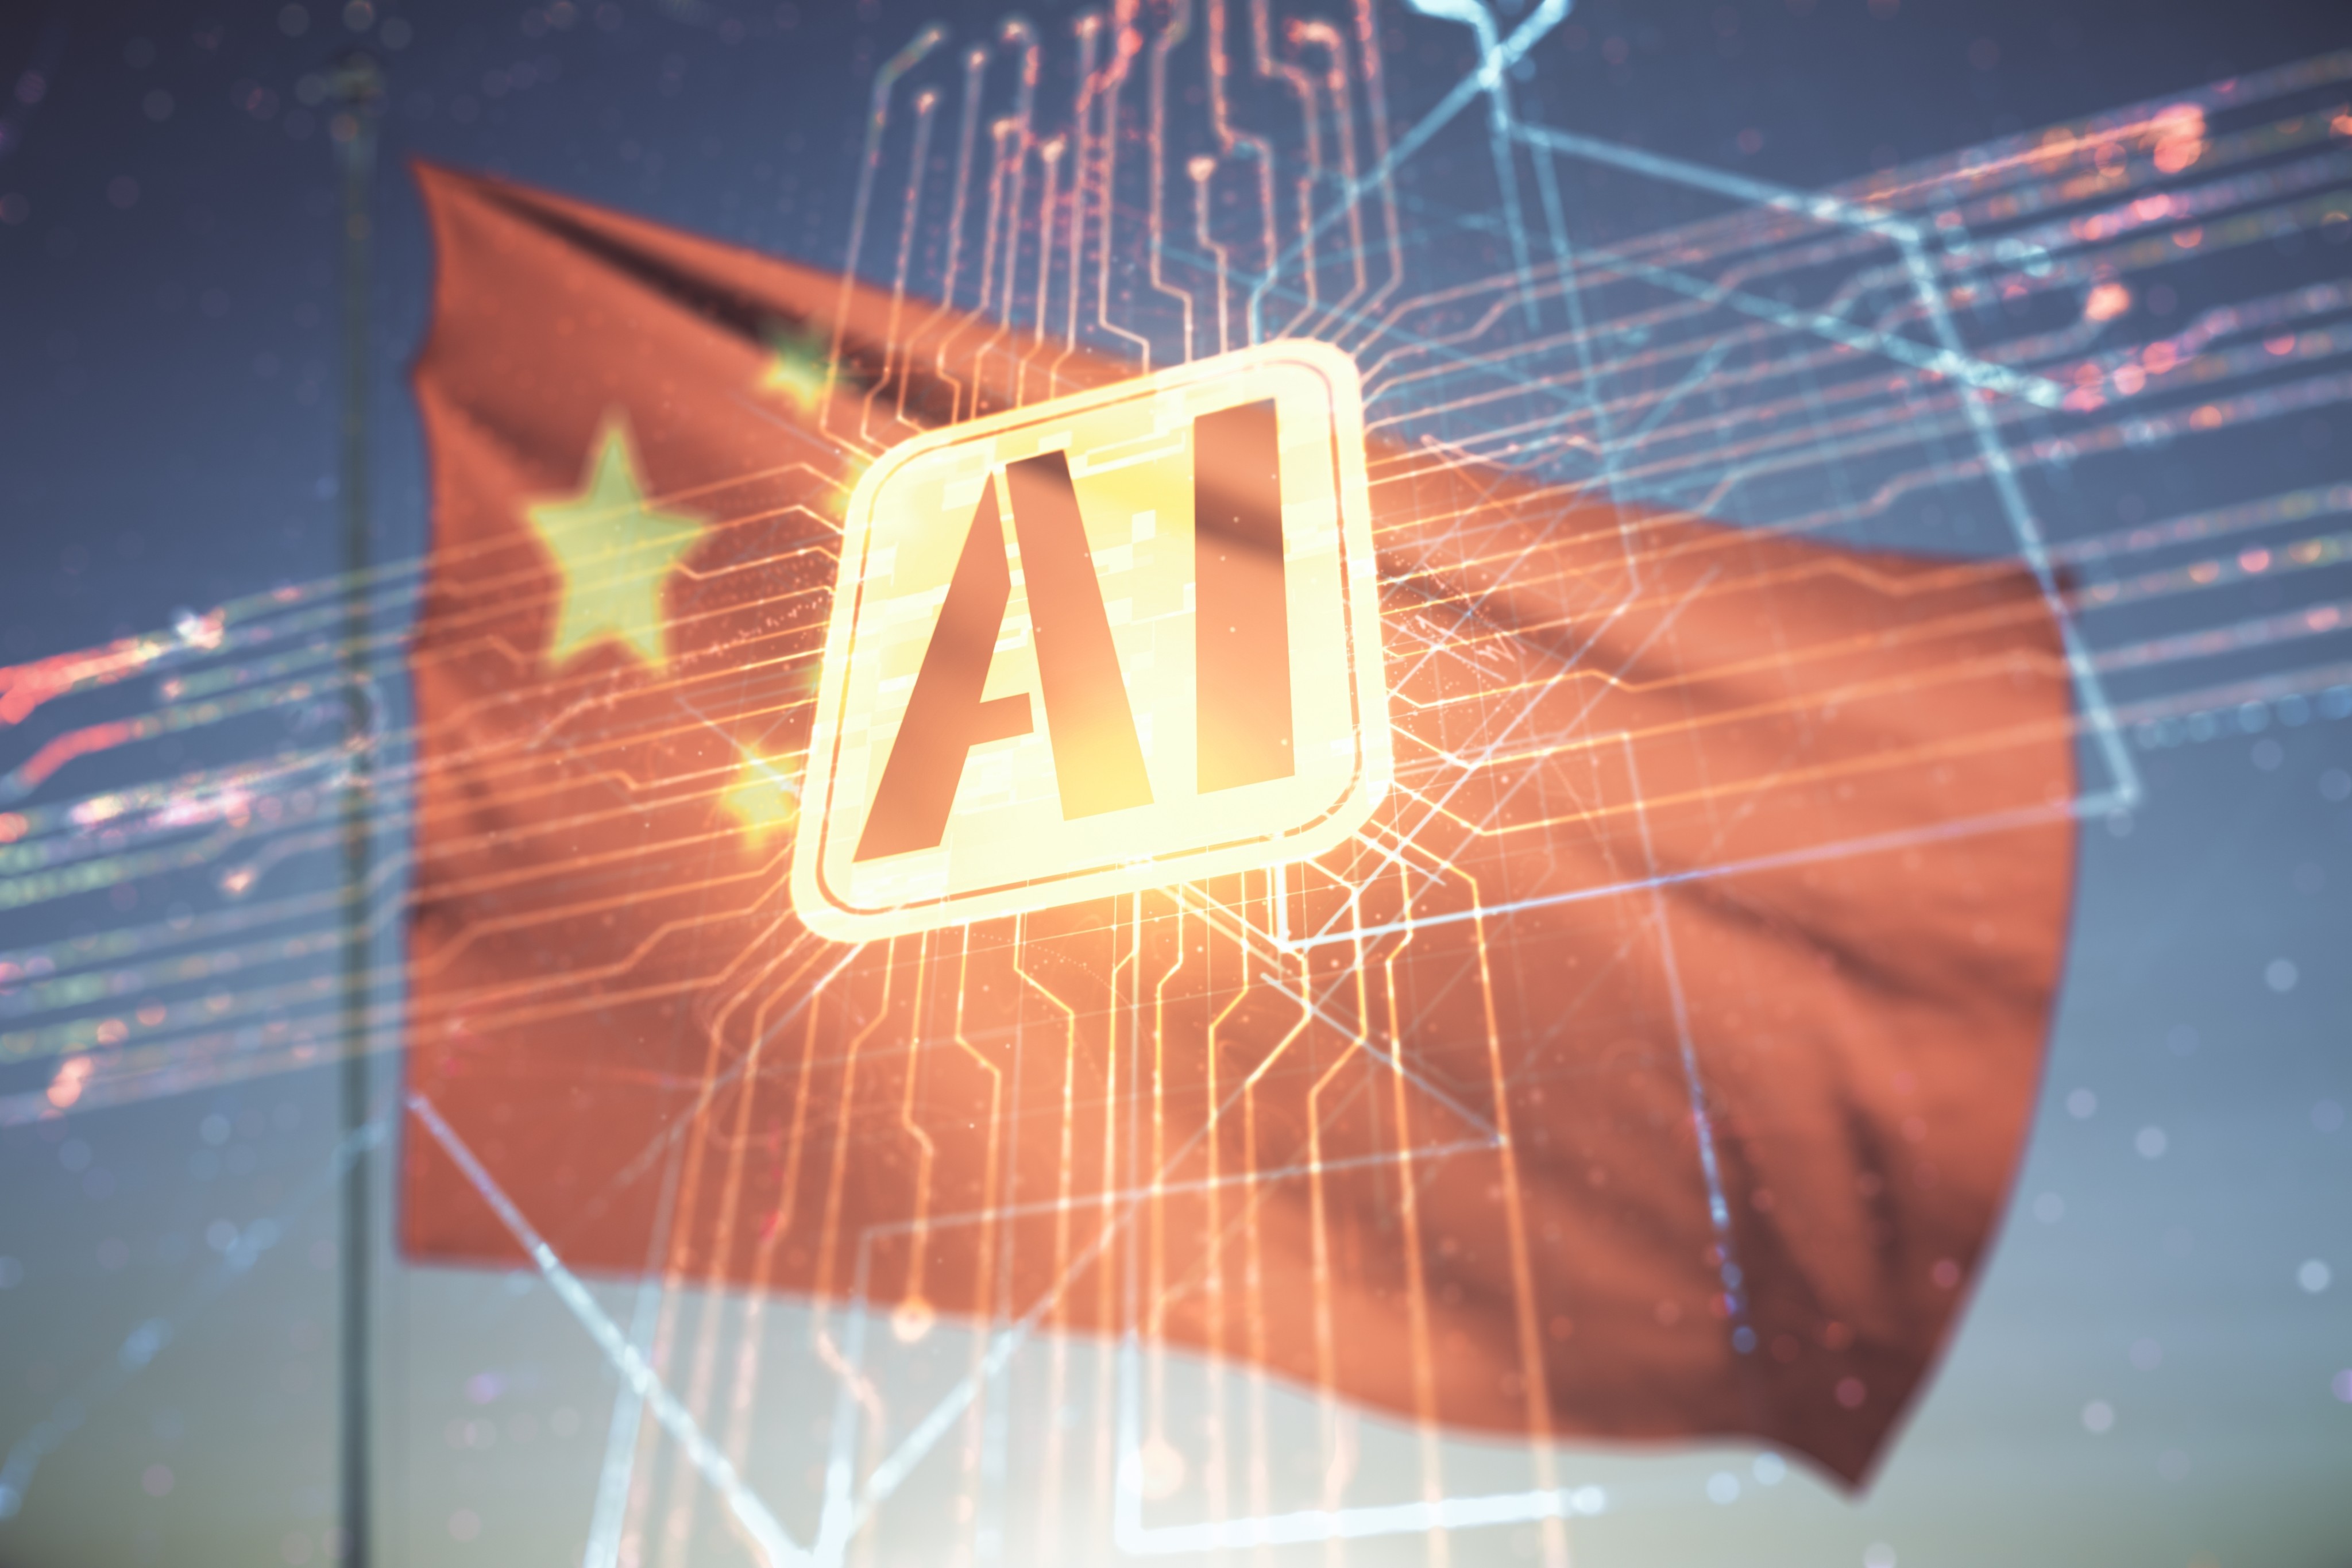 US export controls and sanctions restricting China’s access to AI is helping to create an “intelligence gap” that could increase the risk of a military crisis, a Chinese think tank warns. Photo: Shutterstock